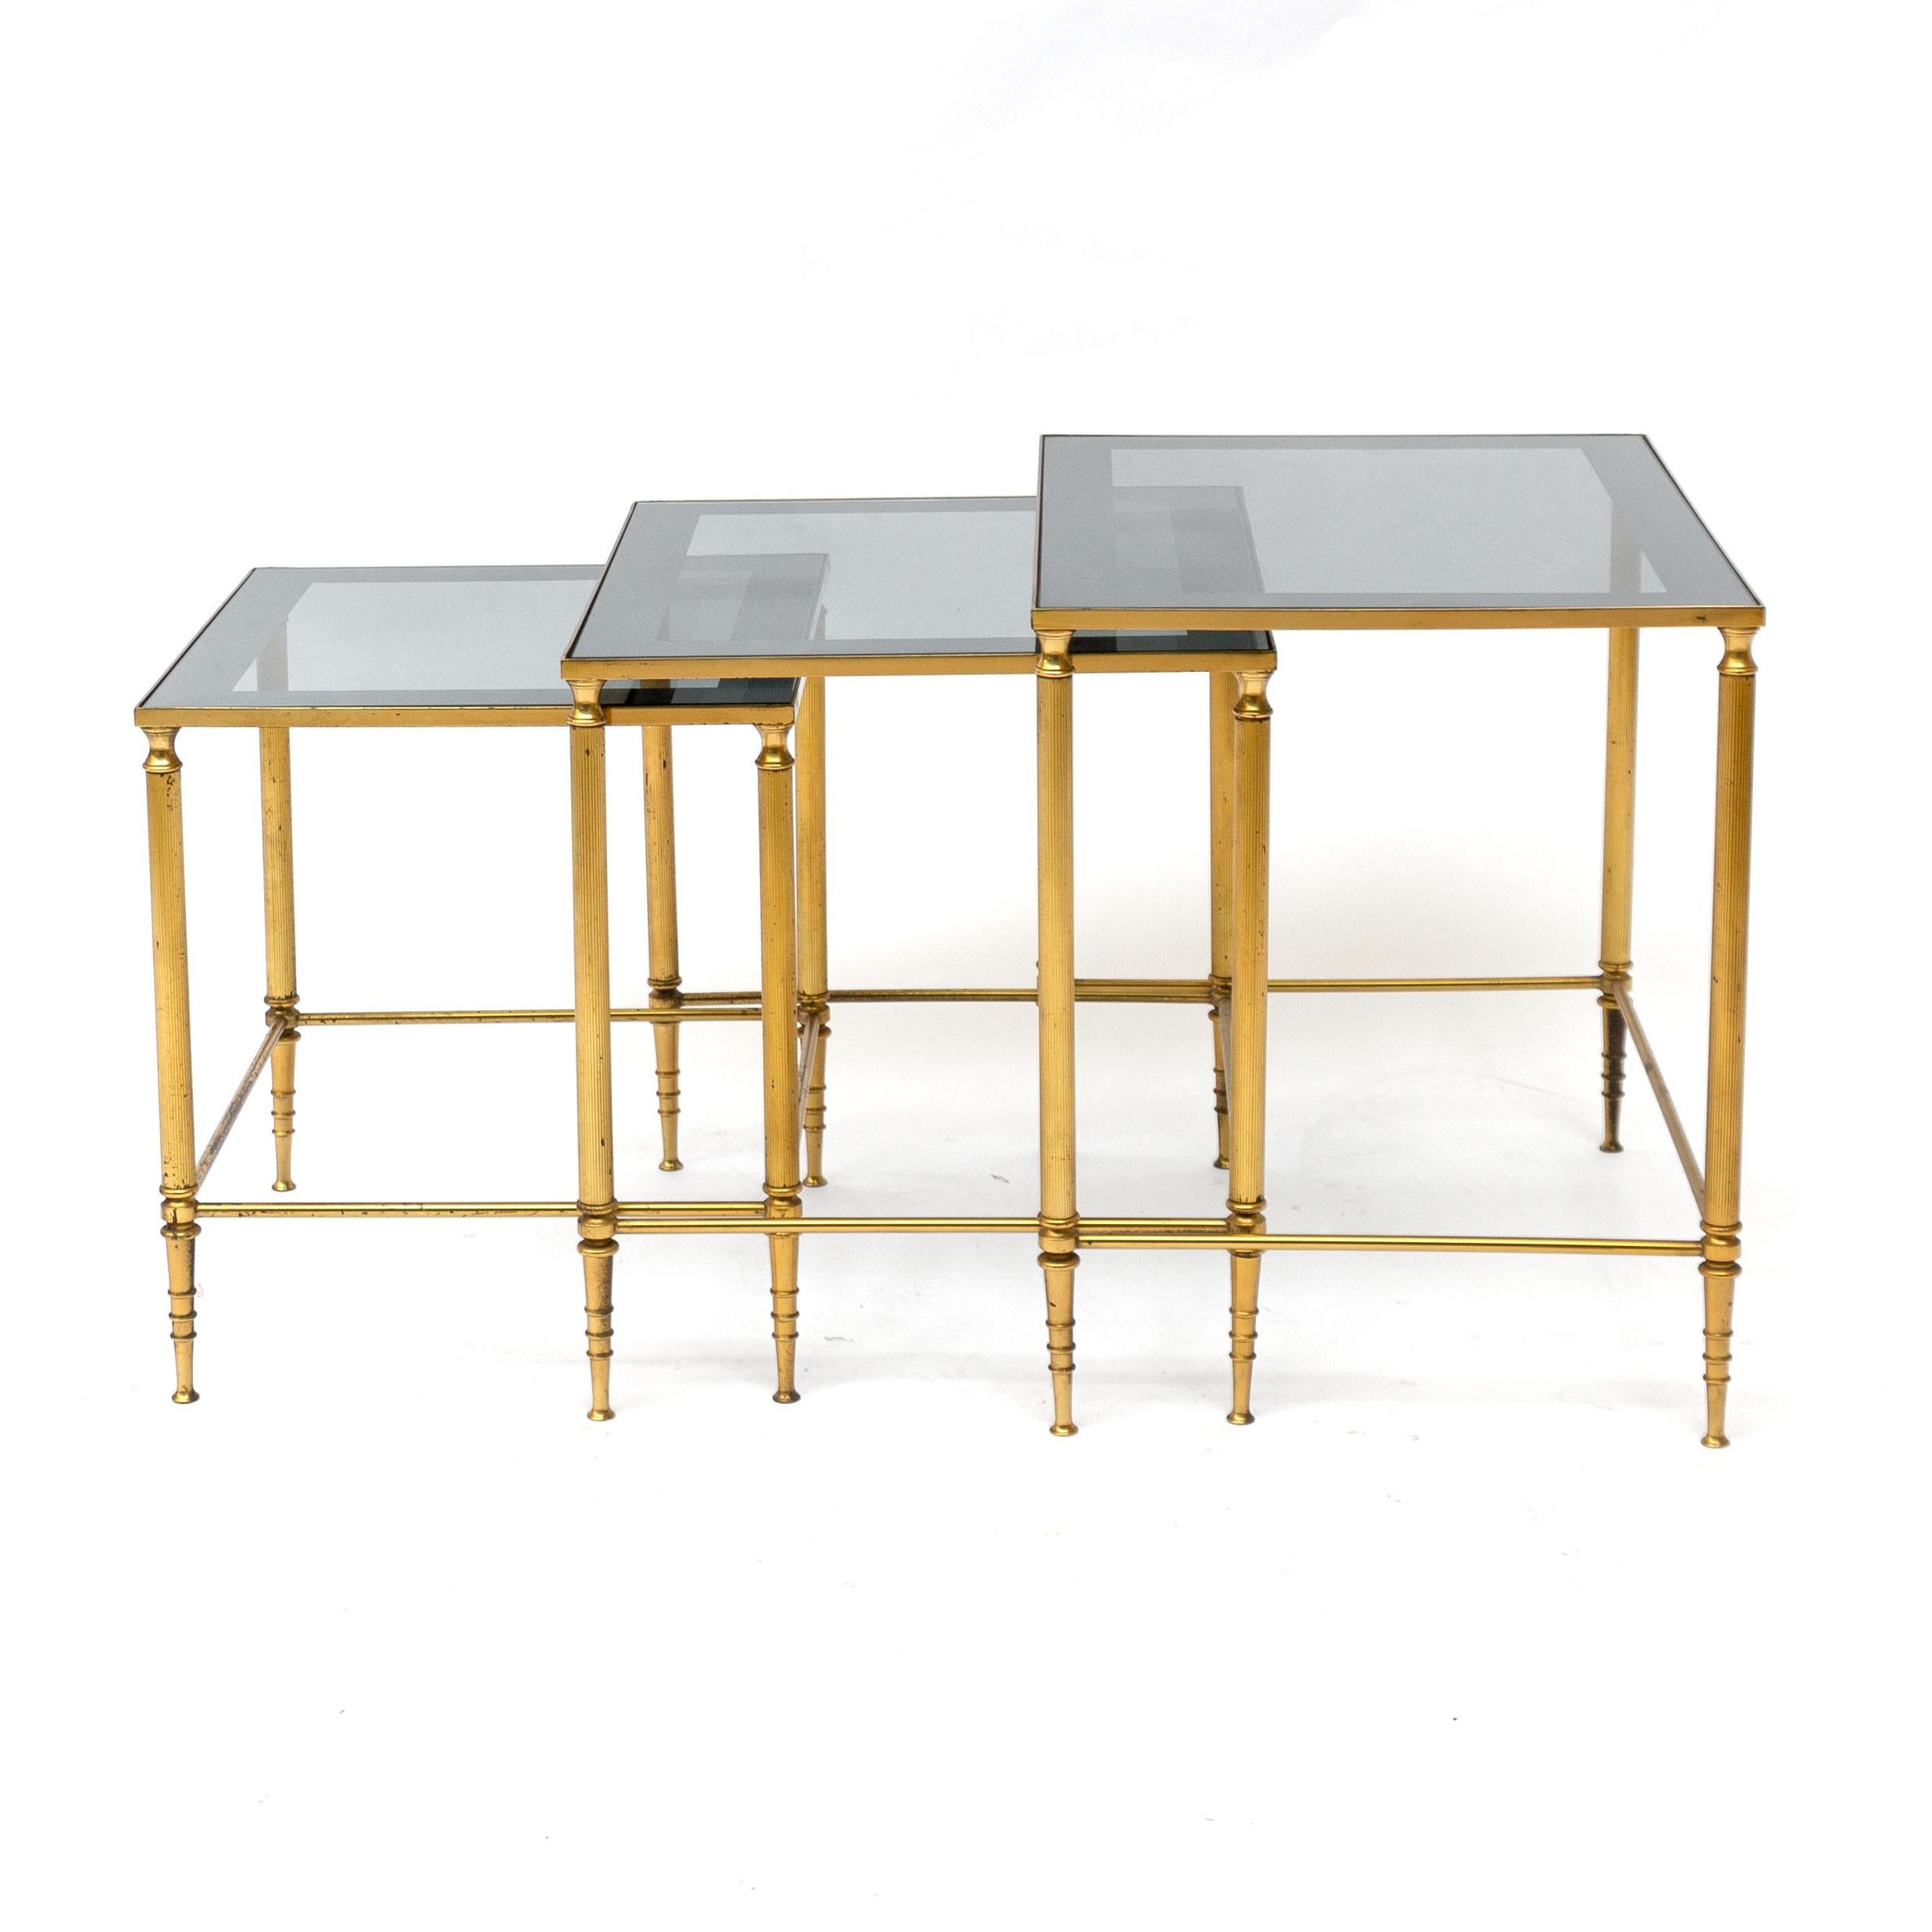 The mirrored glass tabletop makes these tables chique and elegant. Typical for the Mid-Century Modern Hollywood Regency style. Both the brass frames and the mirrored glass top show a very elegant patine!

no.1: 38x36x33
no.2: 40x42x35
no.3: